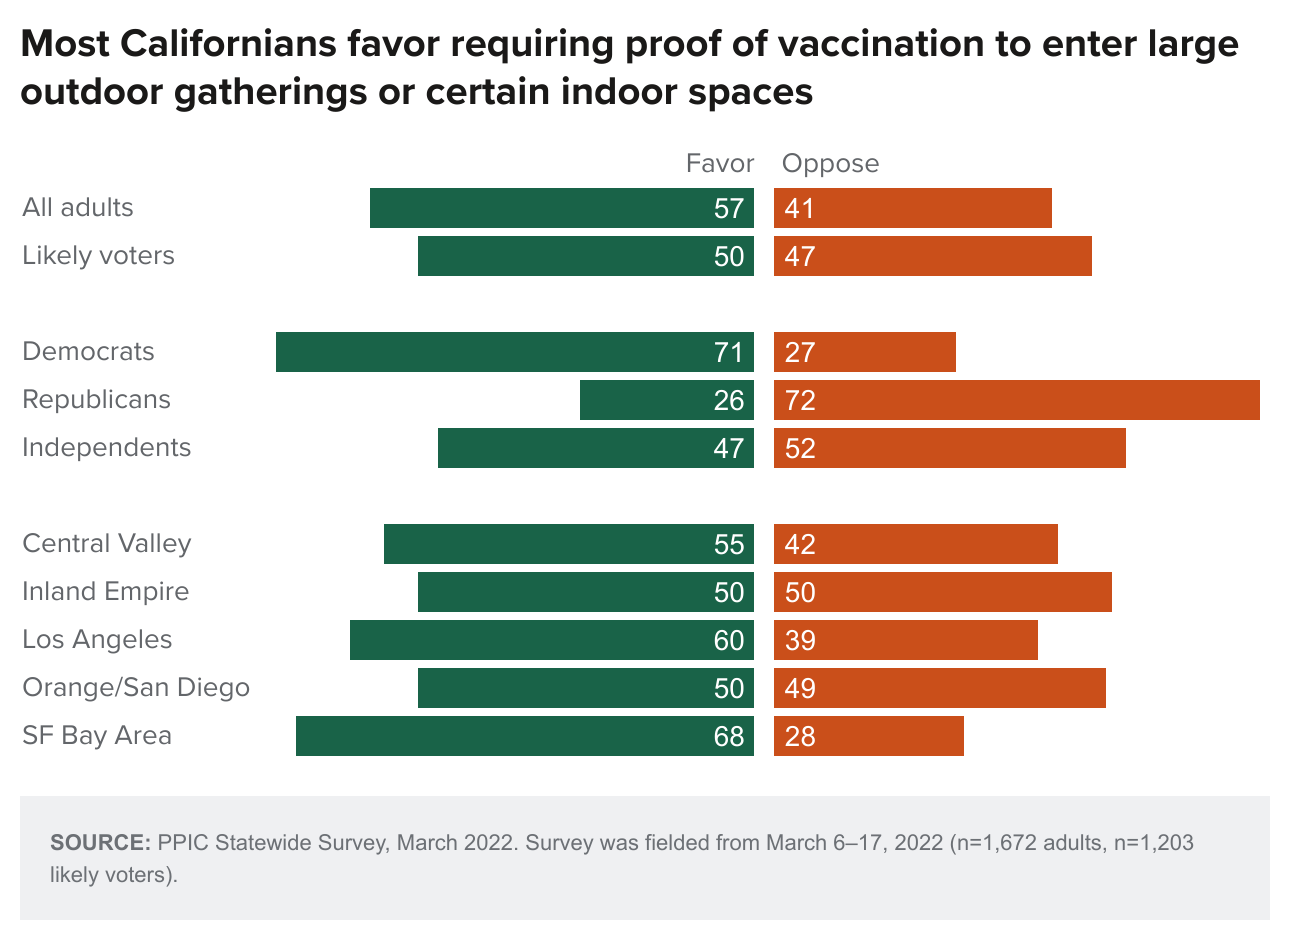 figure - Most Californians favor requiring proof of vaccination to enter large outdoor gatherings or certain indoor spaces